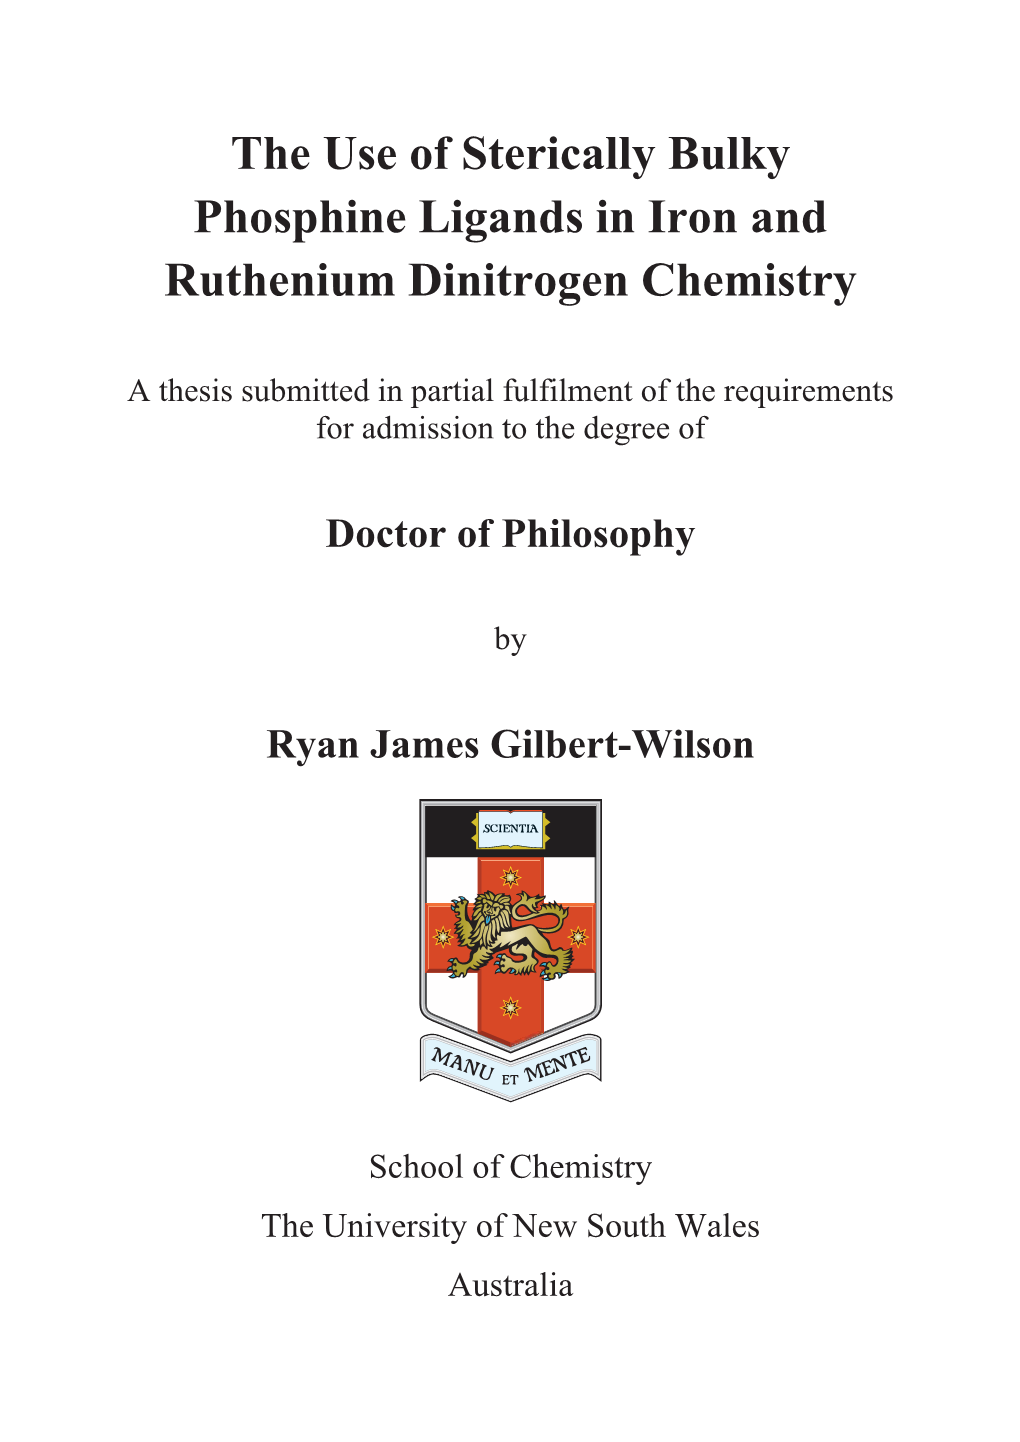 The Use of Sterically Bulky Phosphine Ligands in Iron and Ruthenium Dinitrogen Chemistry